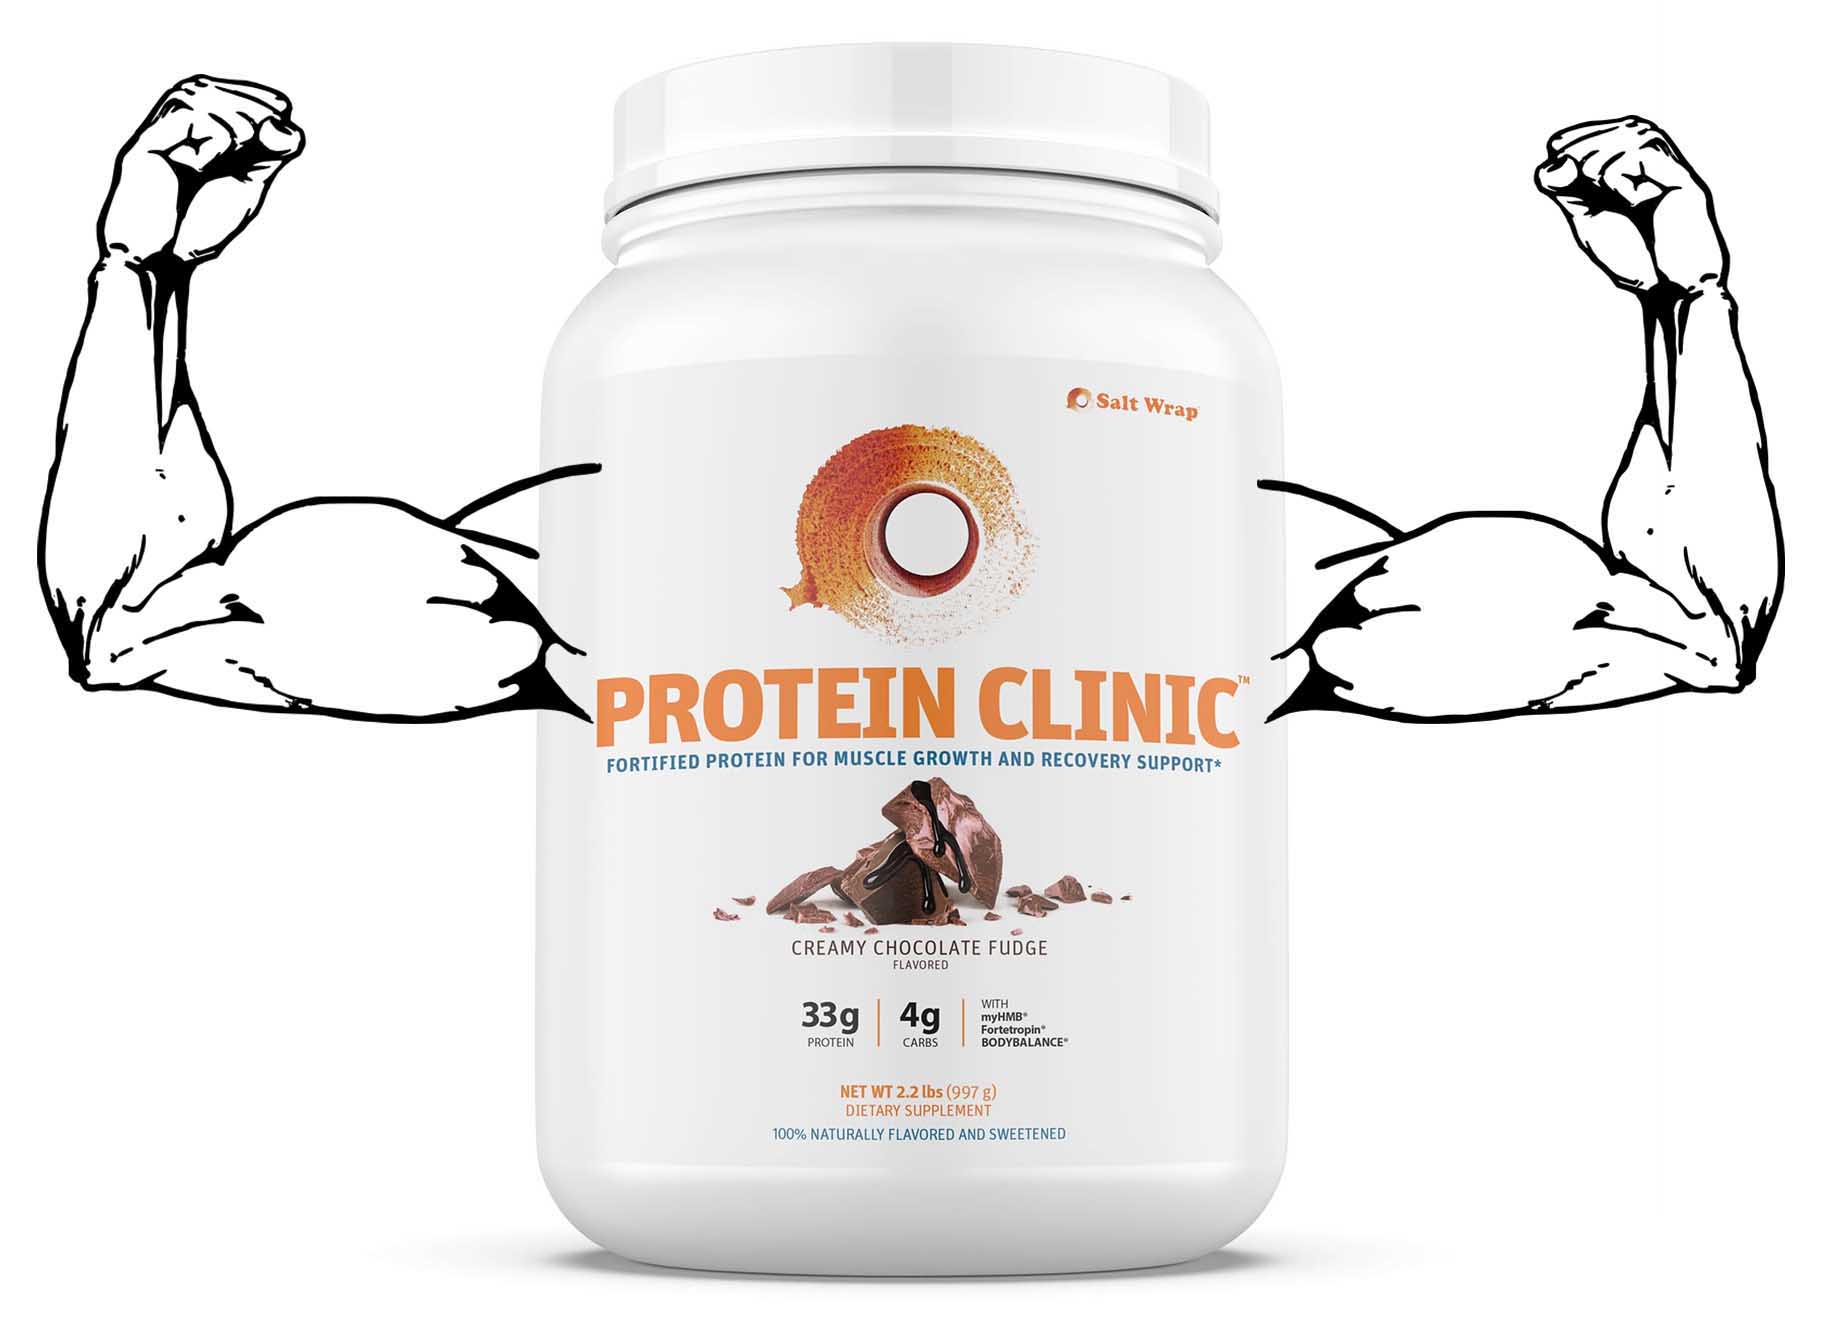 Protein Clinic for natural muscle growth and recovery